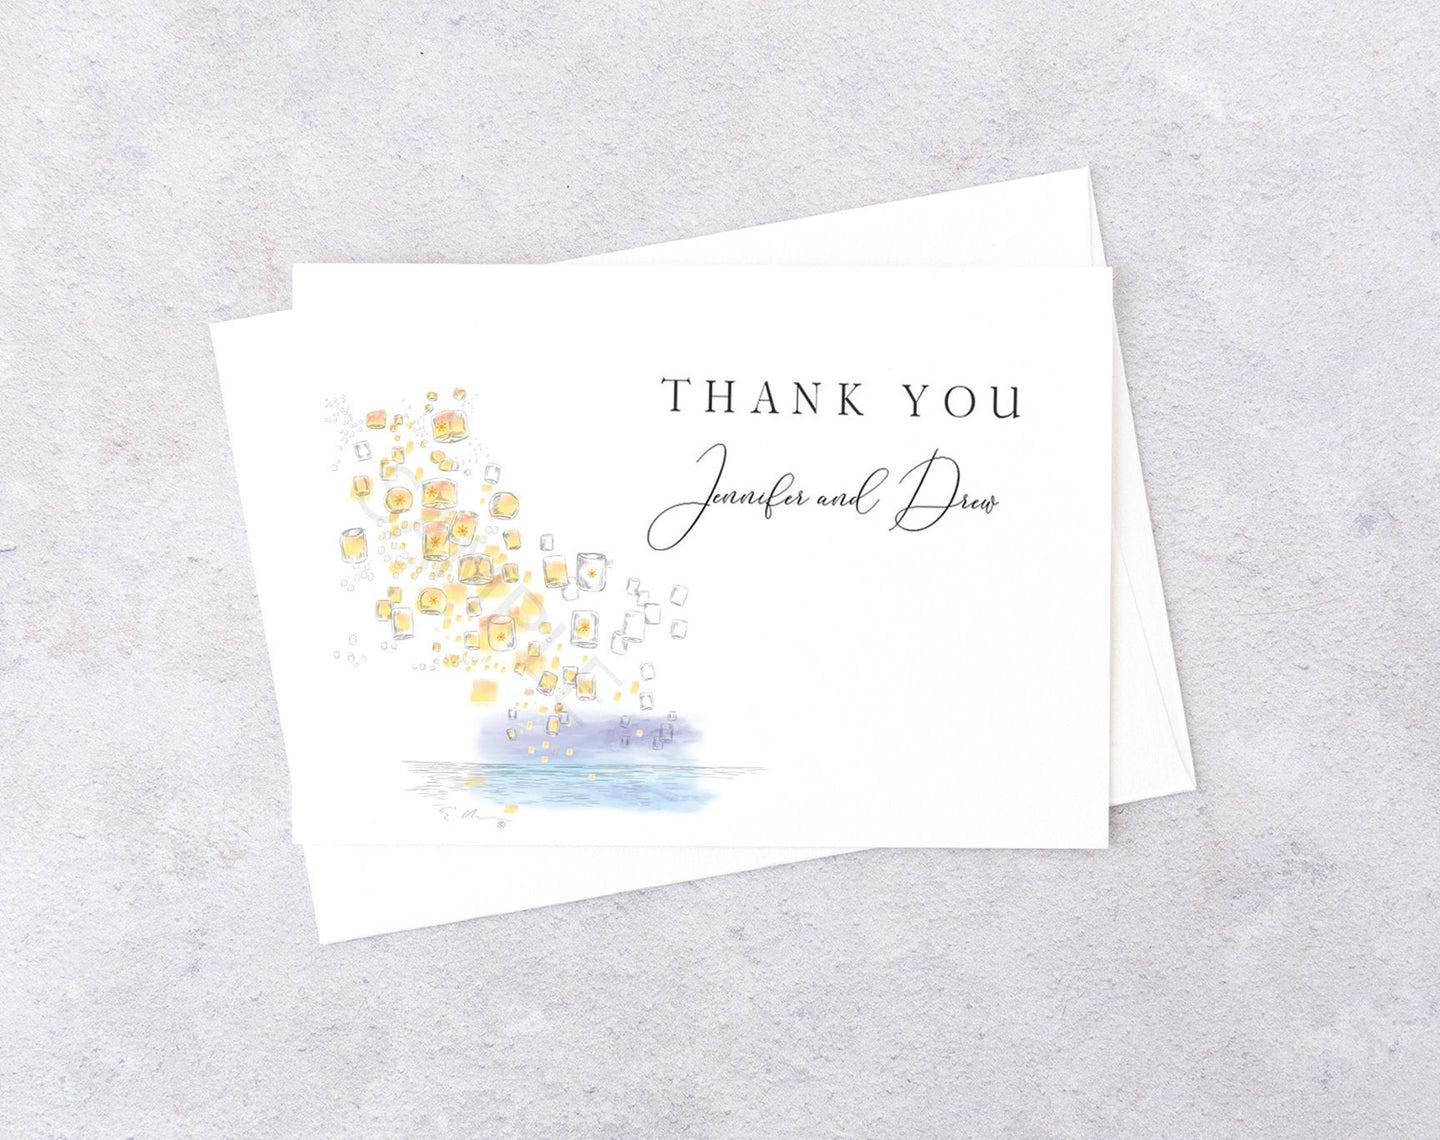 Tangled Lanterns Inspired Thank You Cards, Fairytale, Disney Inspired, Personal Note Cards, Bridal Shower, Thank you Notes (set of 25 cards)